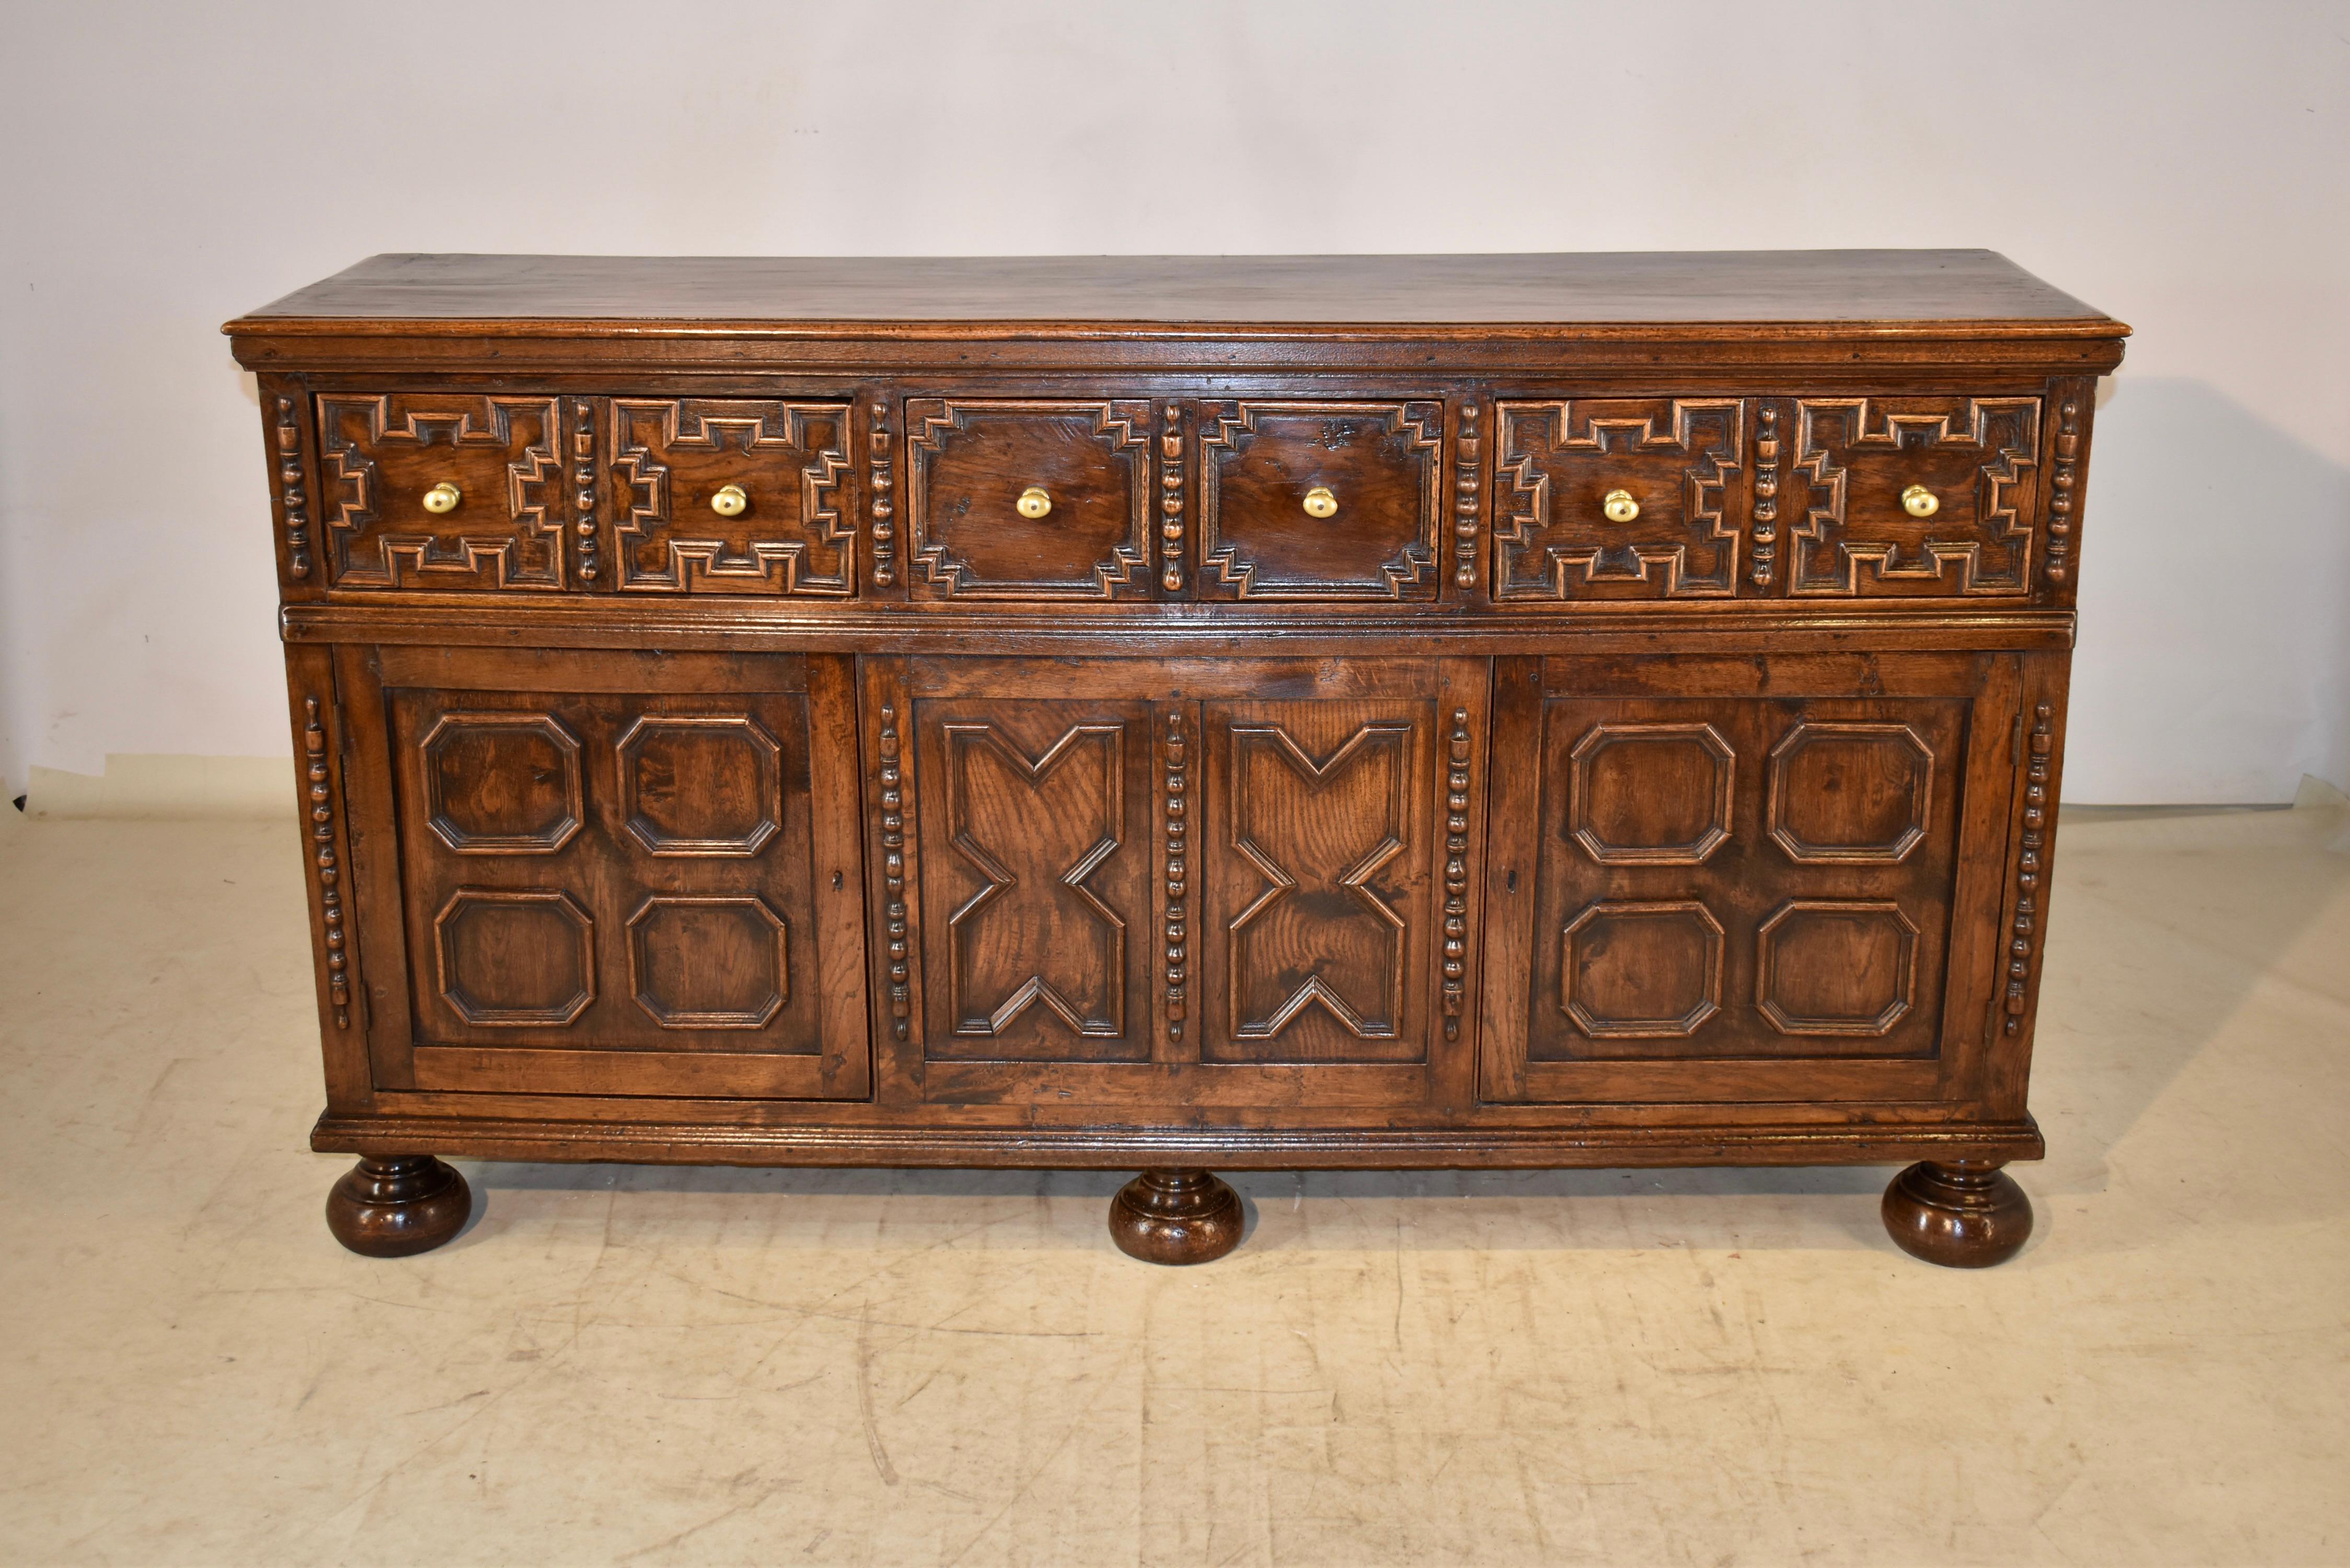 18th century oak dresser base from England. The top is made from a single oak plank, and has a beveled edge. The sides are hand paneled, and the front of the case has three drawers, all with raised geometric paneled drawer fronts, flanked by